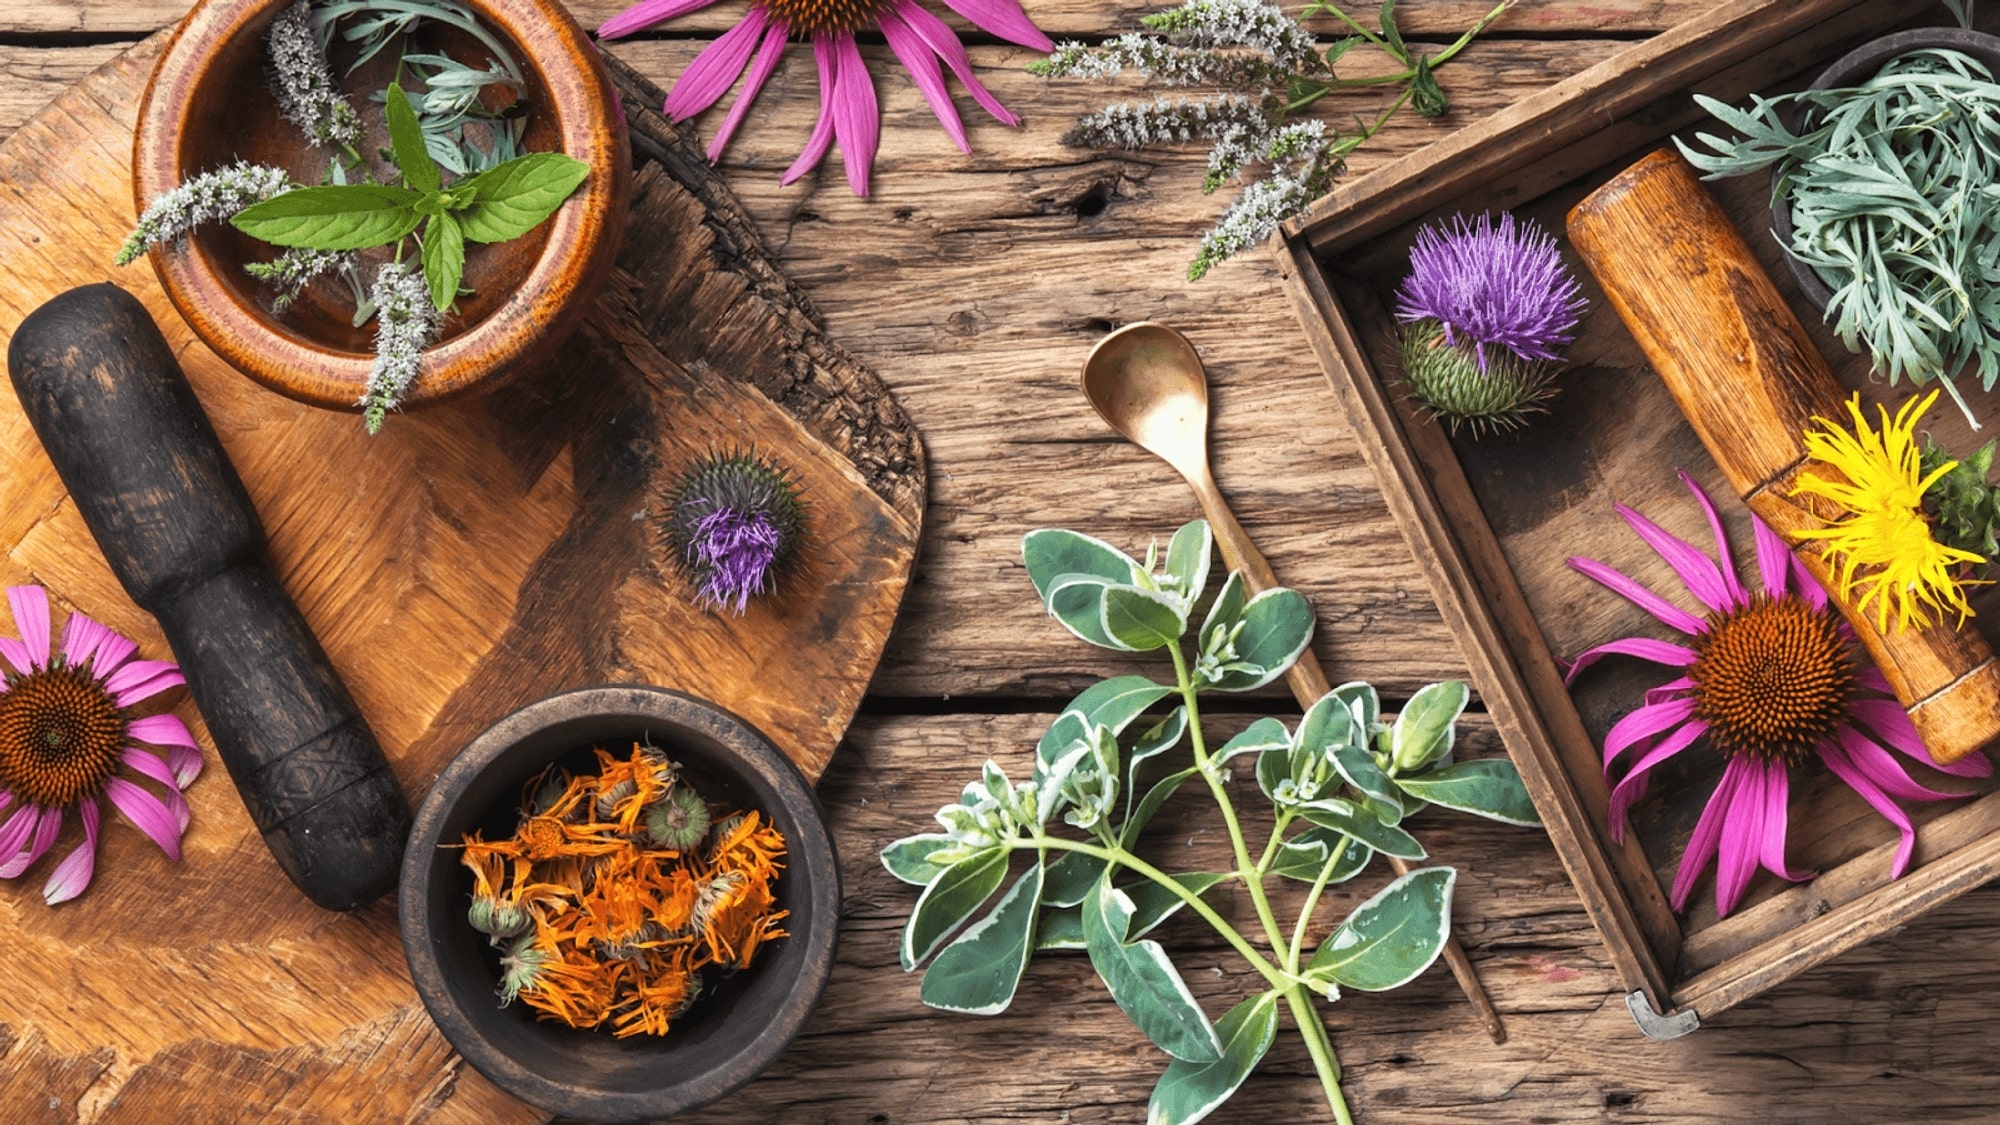 Flowers and herbs on a table with a mortar